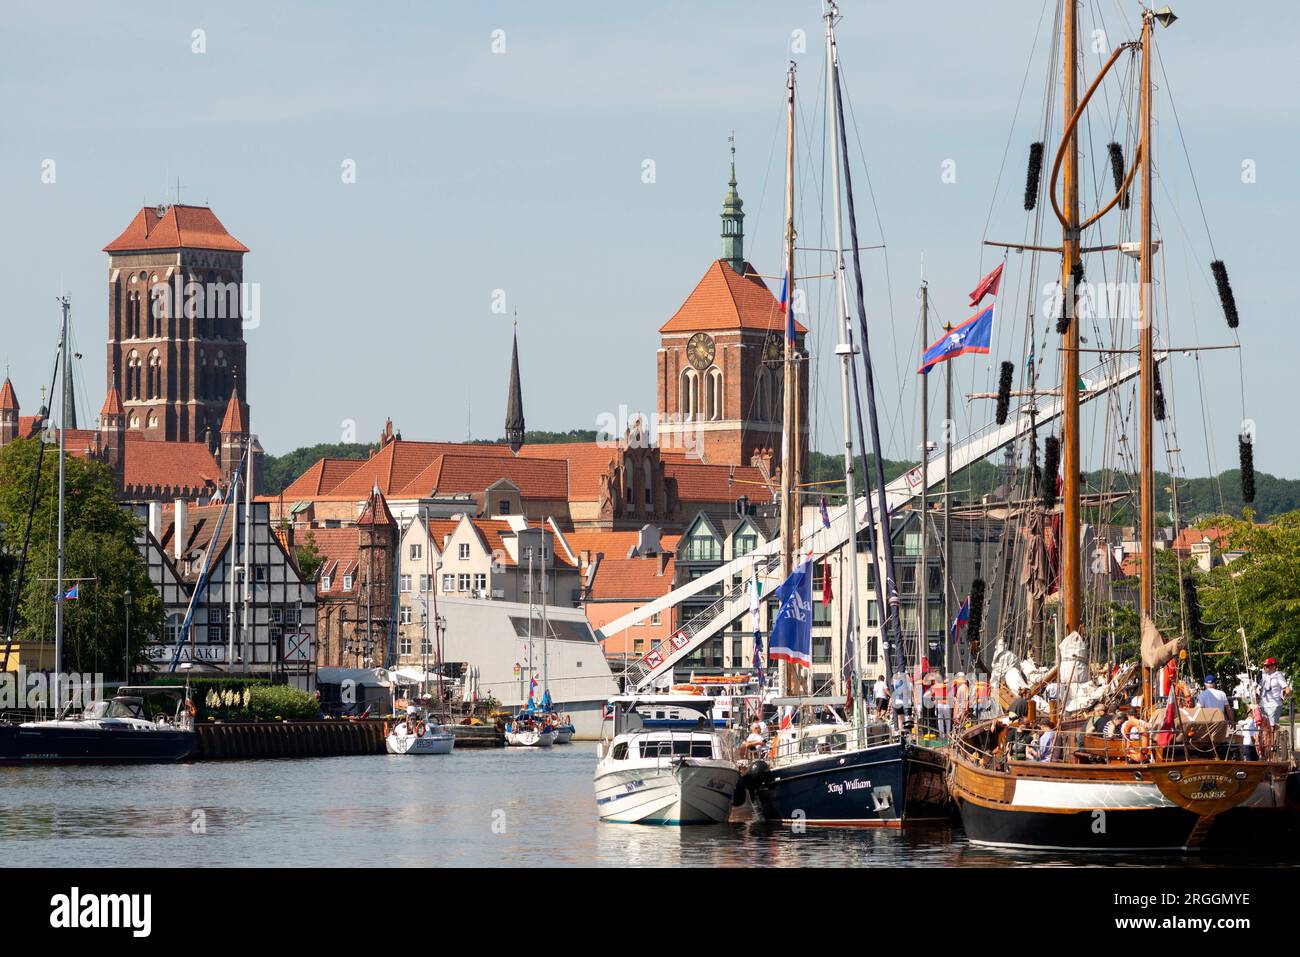 Sailboats in Motlawa River and classic view to the waterfront promenade buildings in the Old Town of Gdansk, Poland, Europe, EU Stock Photo